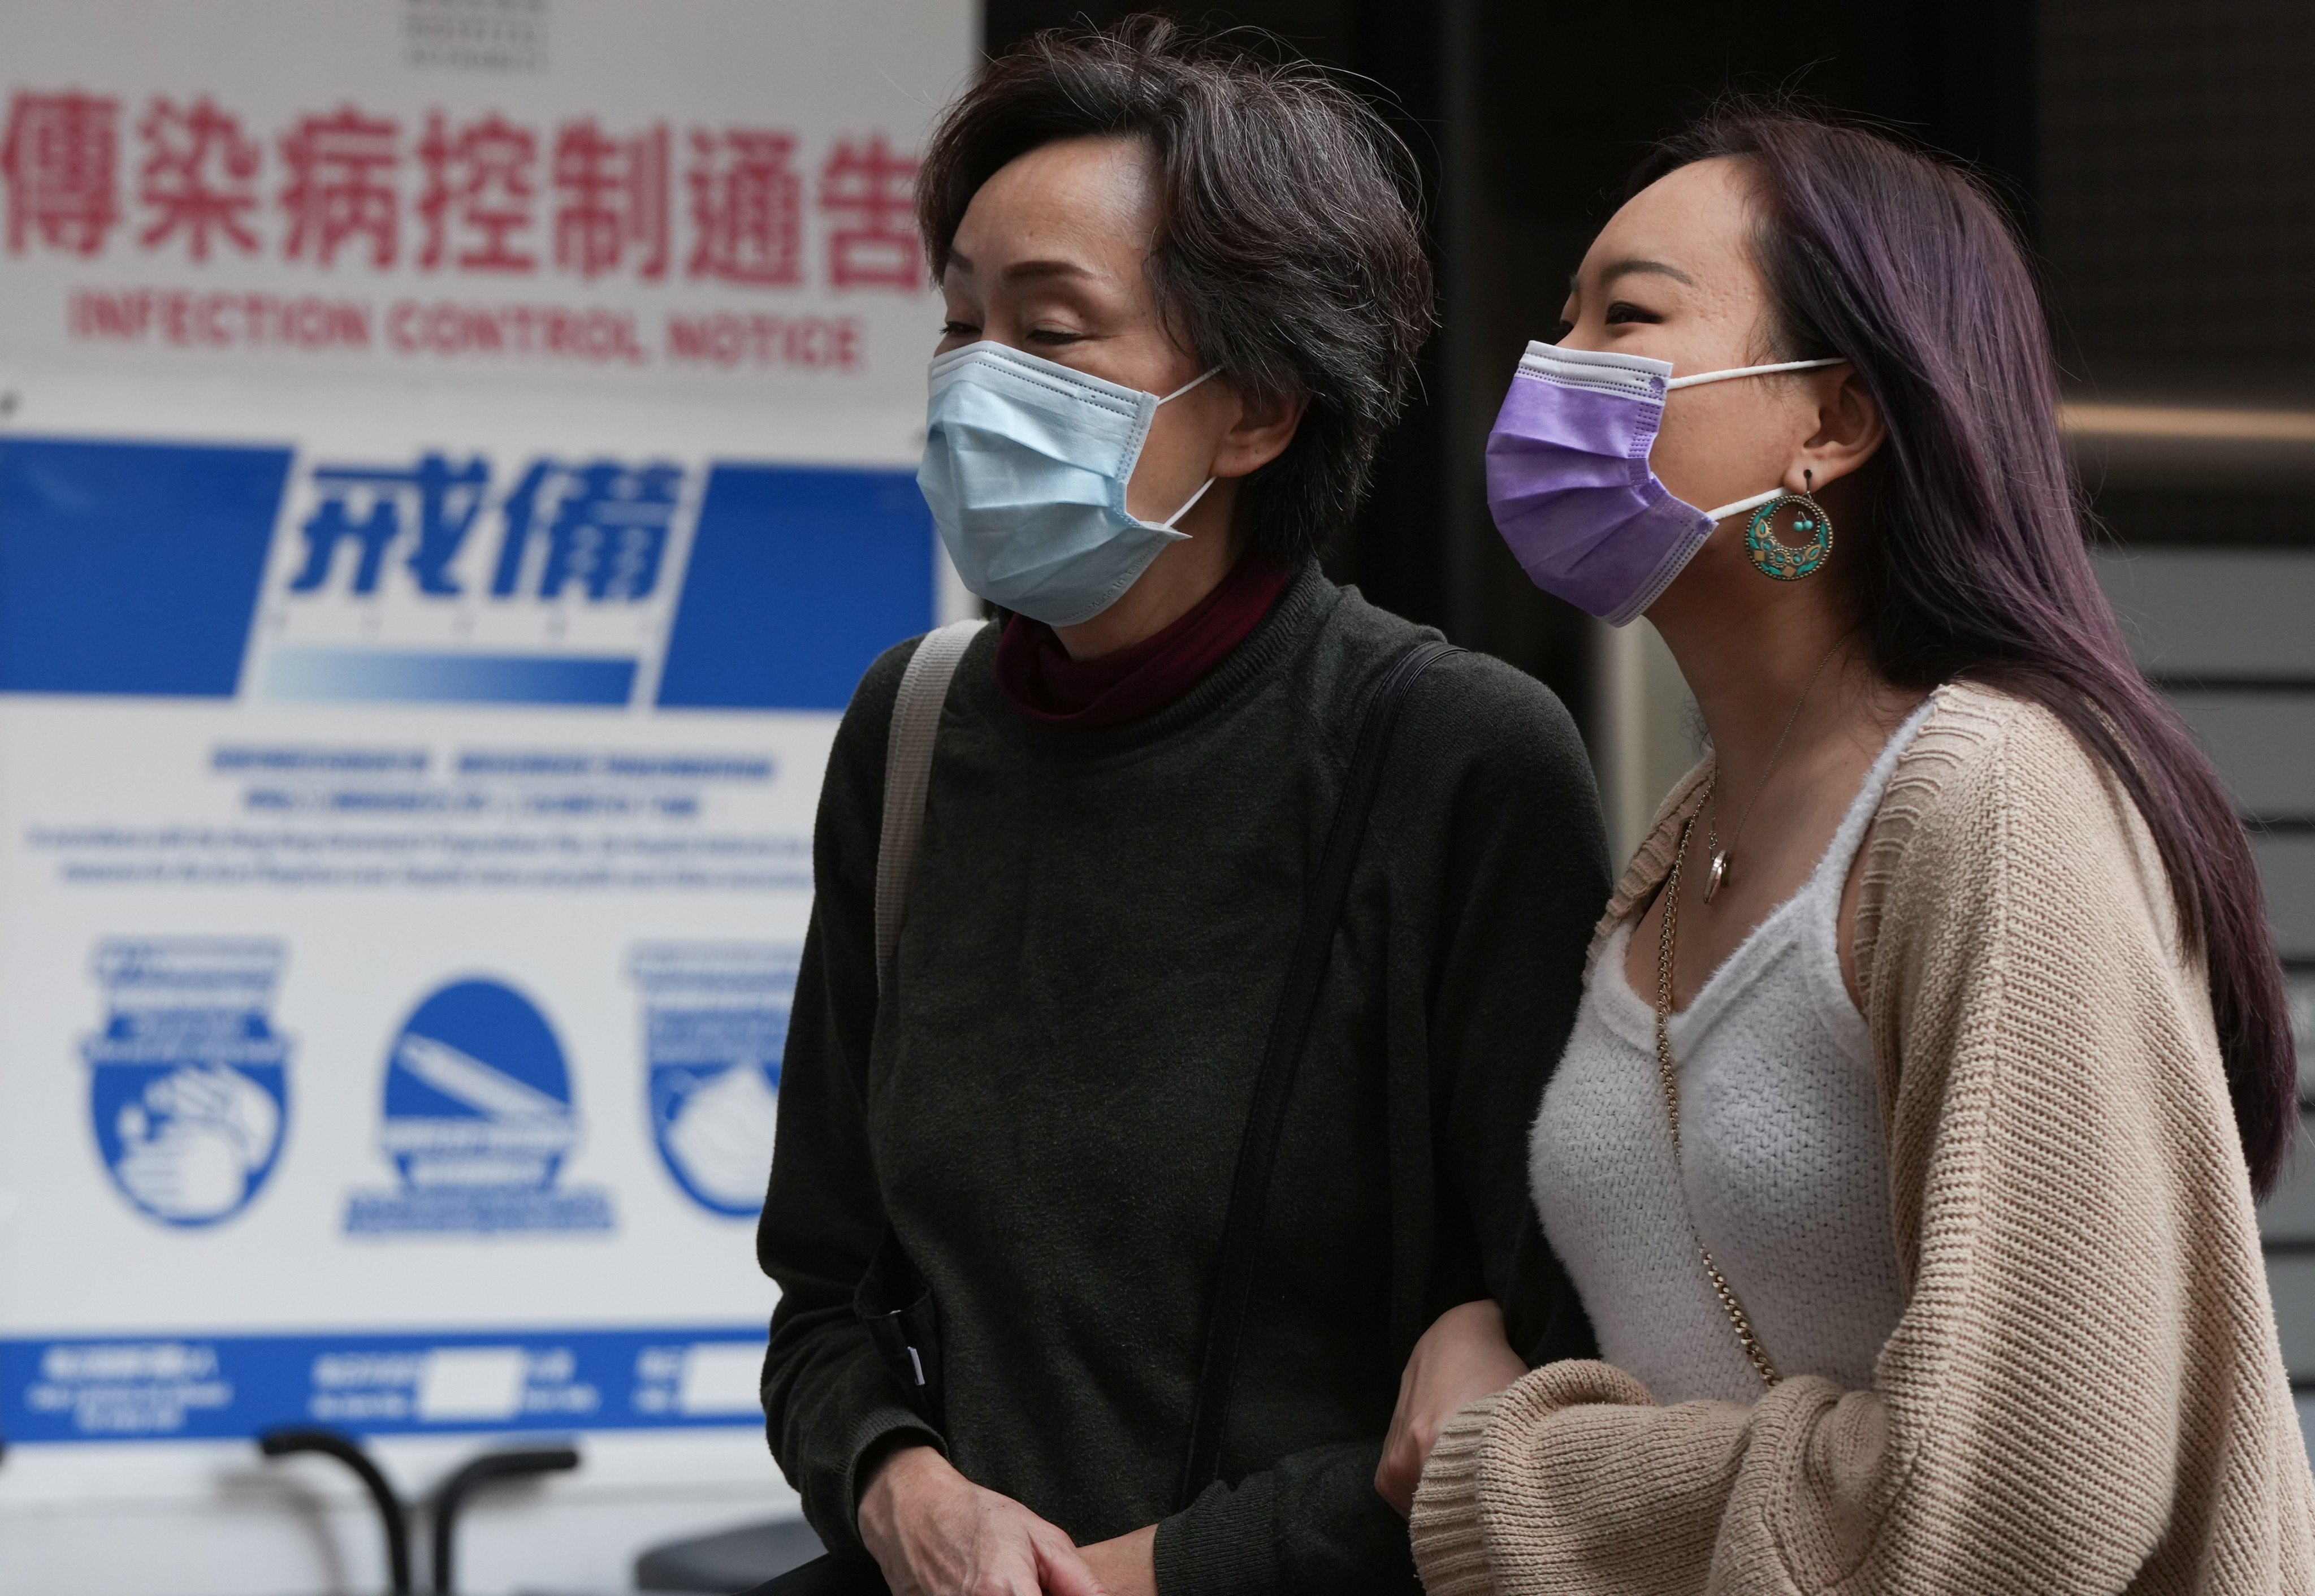 Influenza activity is expected to further increase in the coming weeks, the Centre for Health Protection says. Photo: Eugene Lee